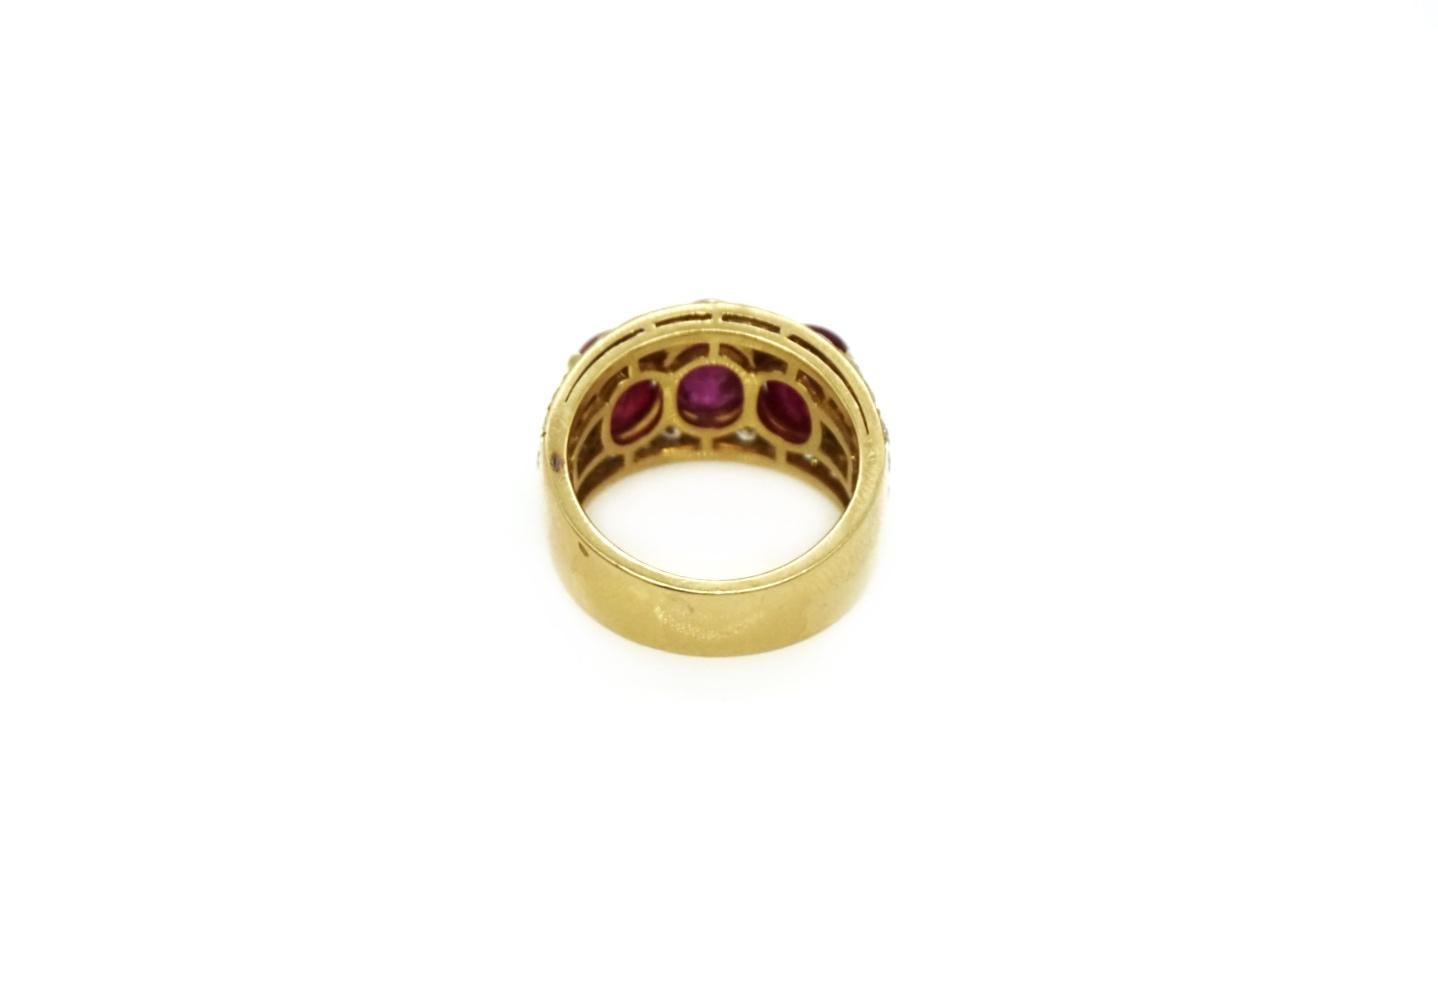 Bulgari 18 karat yellow gold ring with 3 cabochon rubies totaling approximately 7.61 carats and round brilliant diamonds. Made in Italy,  circa 1970.